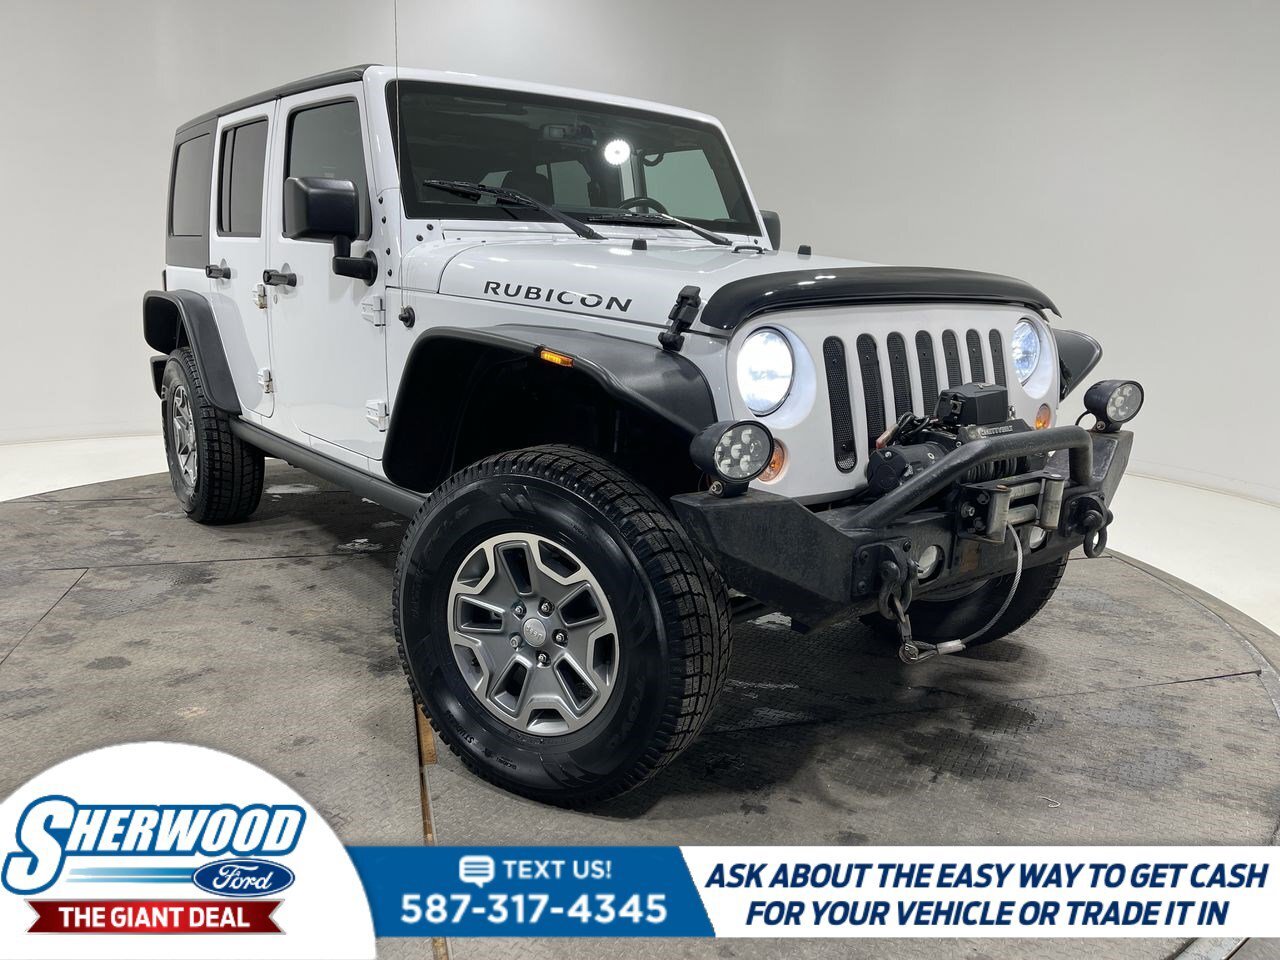 2018 Jeep Wrangler JK Unlimited Rubicon 4X4- $0 Down $175 Weekly